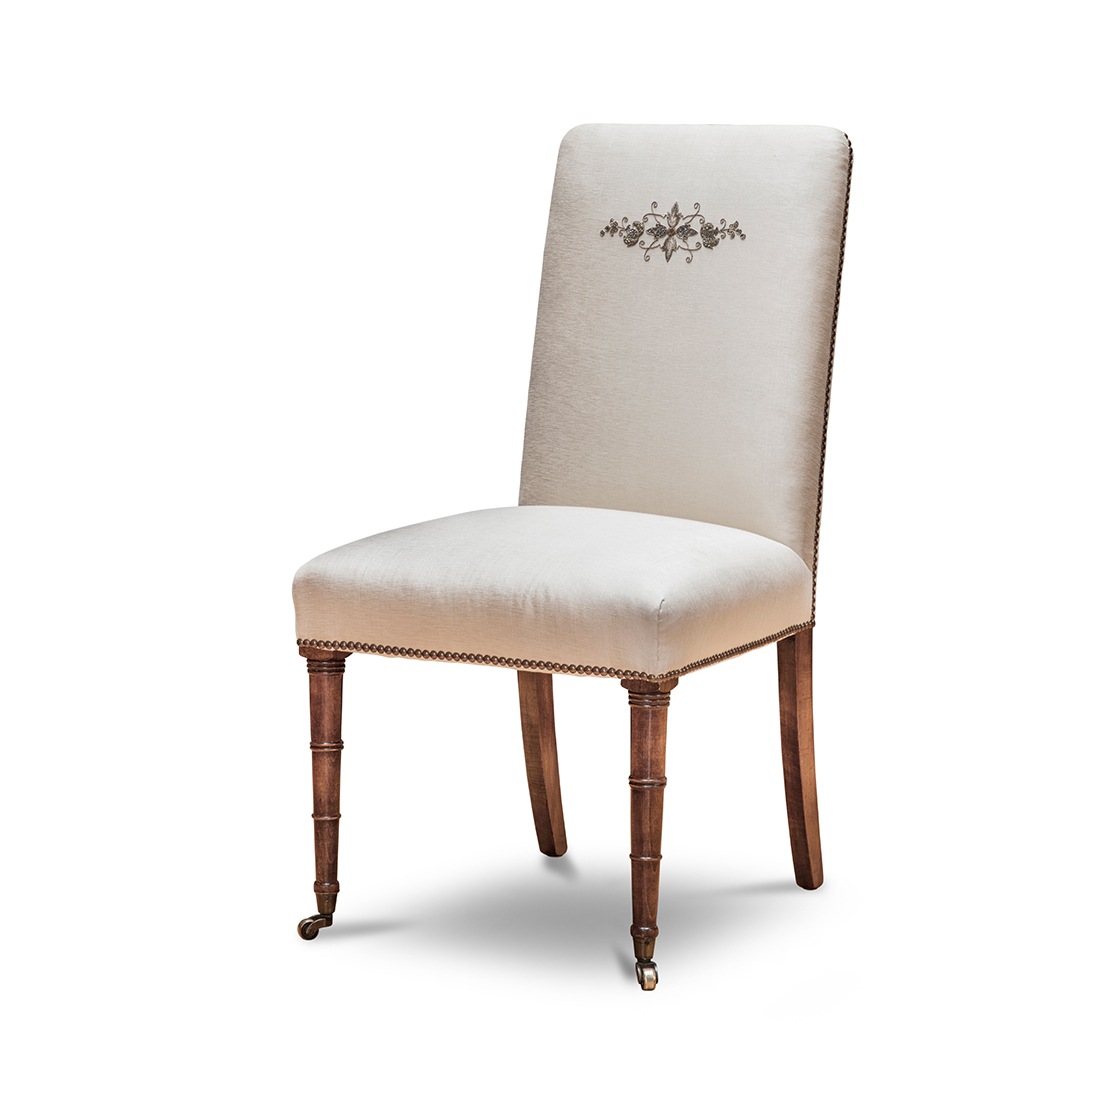 Pavilion side chair with Cellini embroidery in Lagan silk - Beaumont & Fletcher